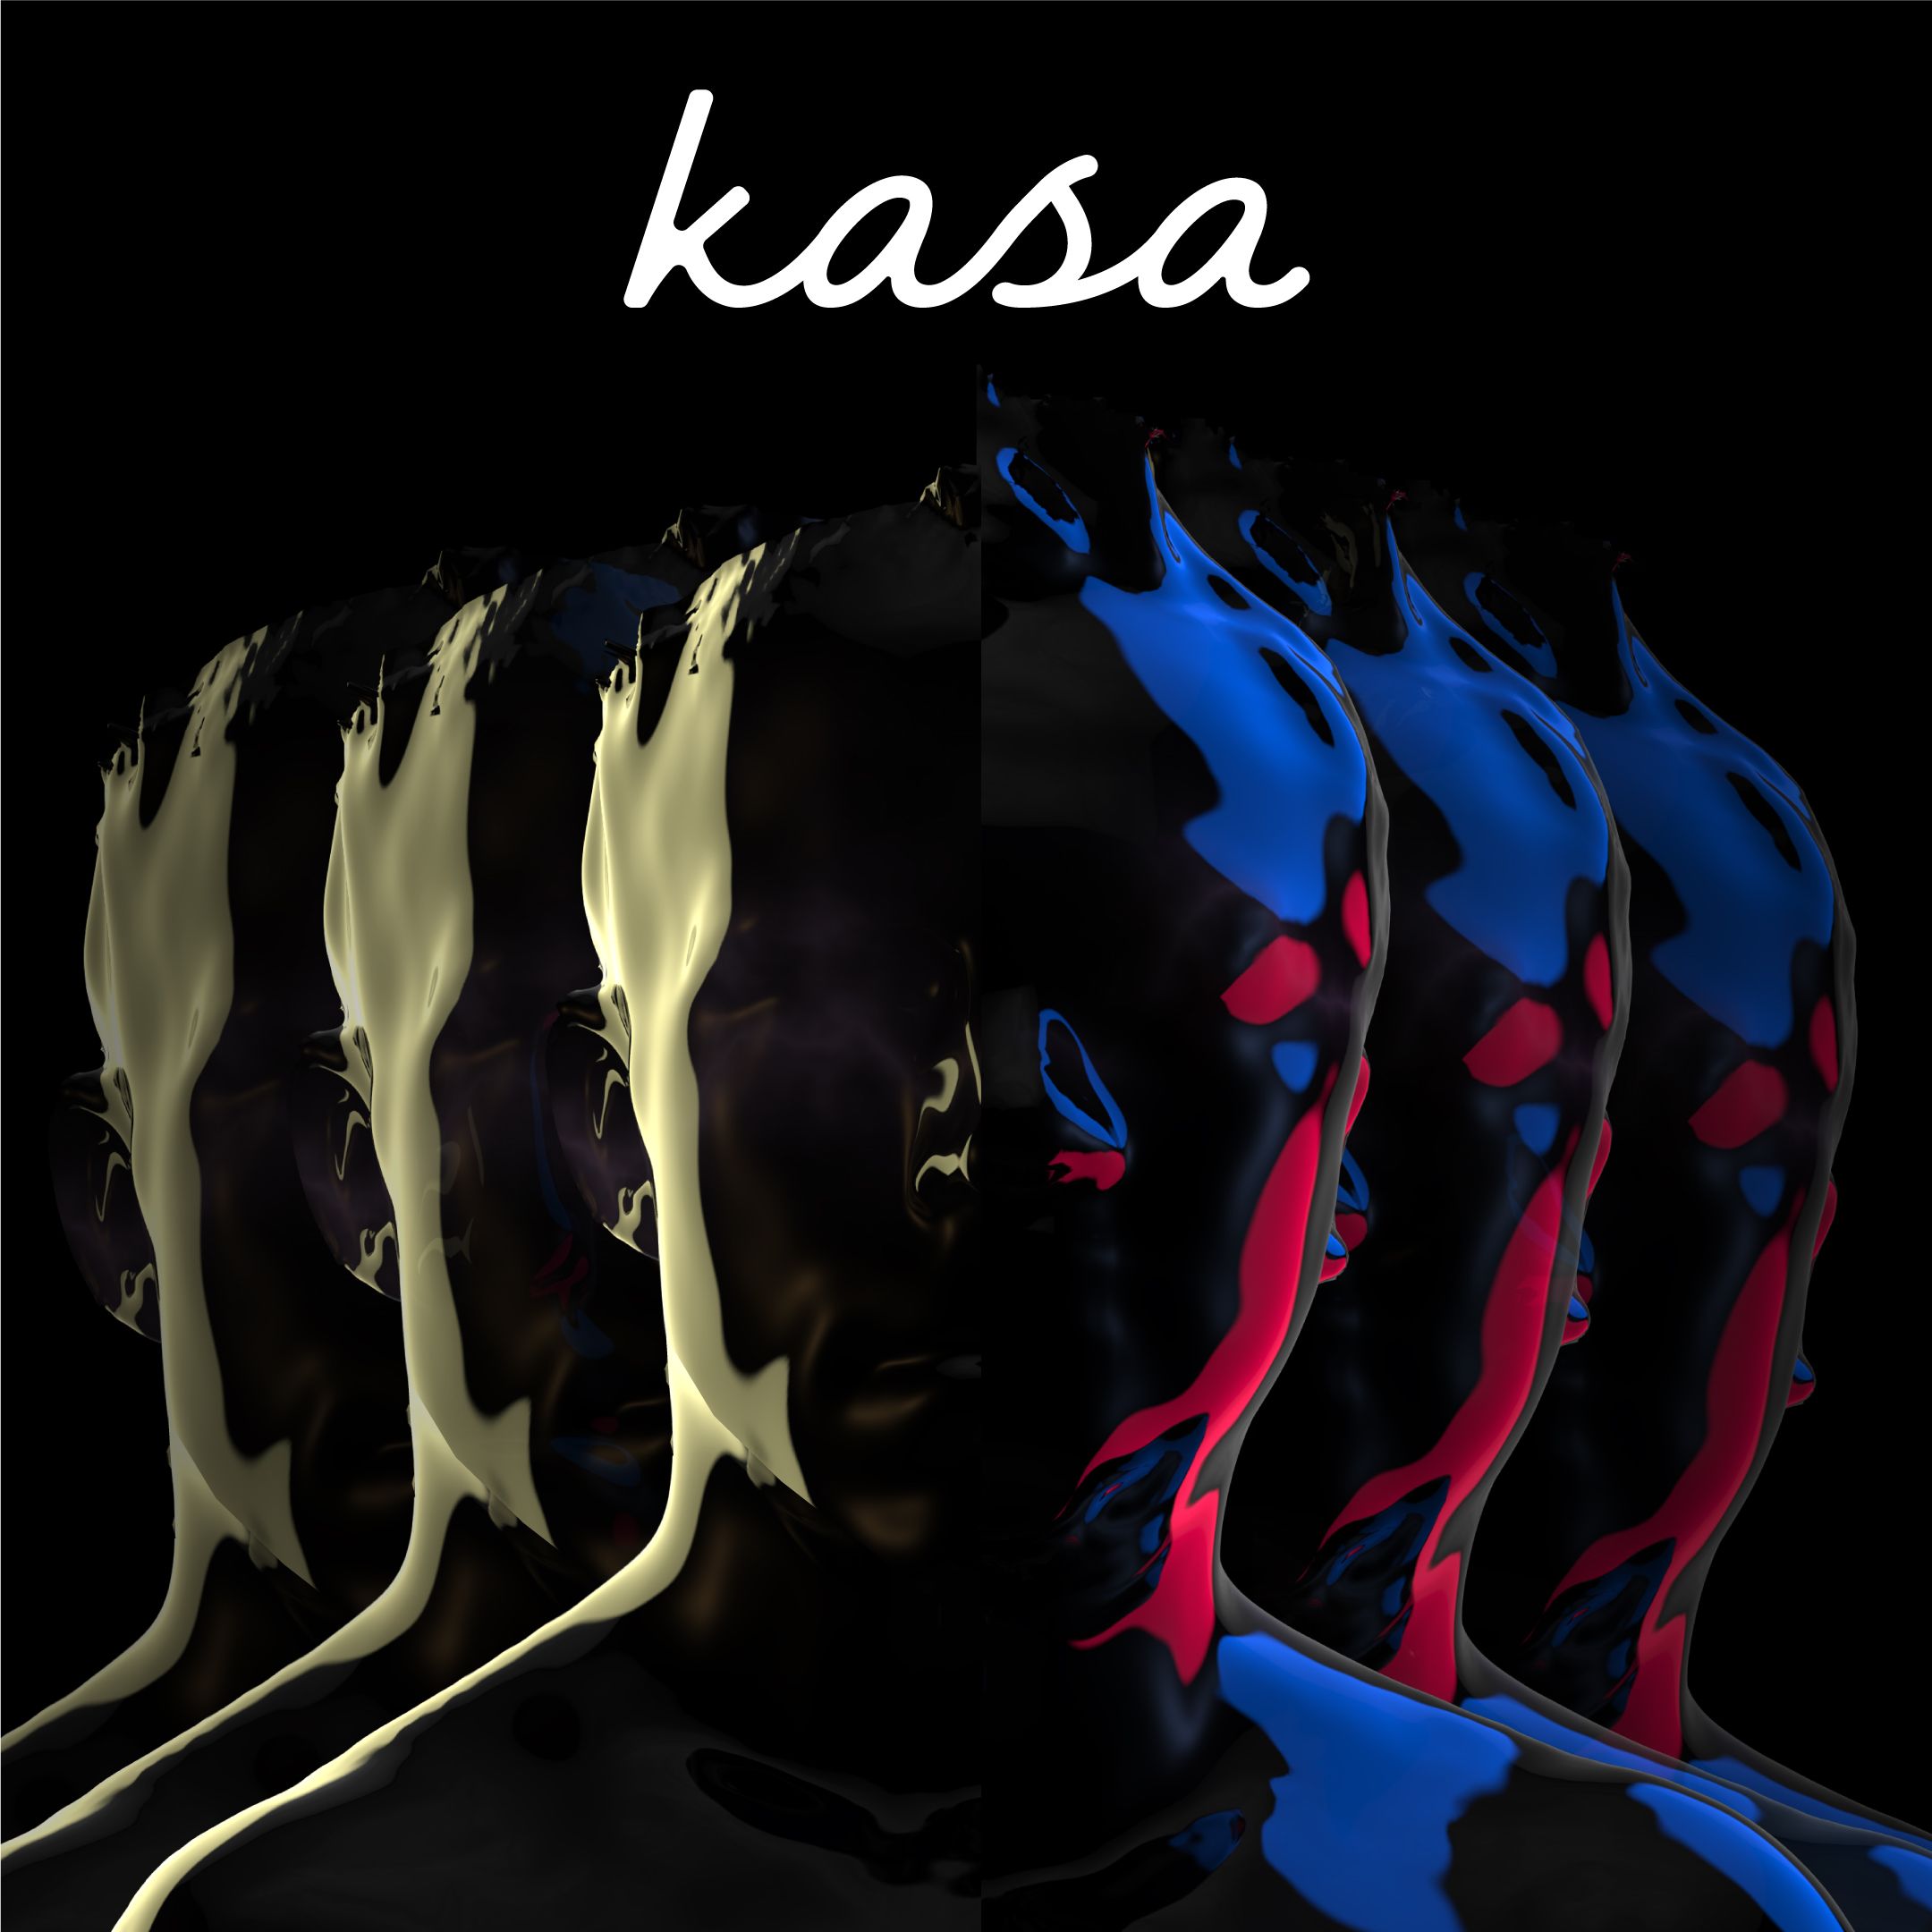 a digital graphic featuring a multicolored silhouette of a man's head moving side to side under cursive script that says Kasa.